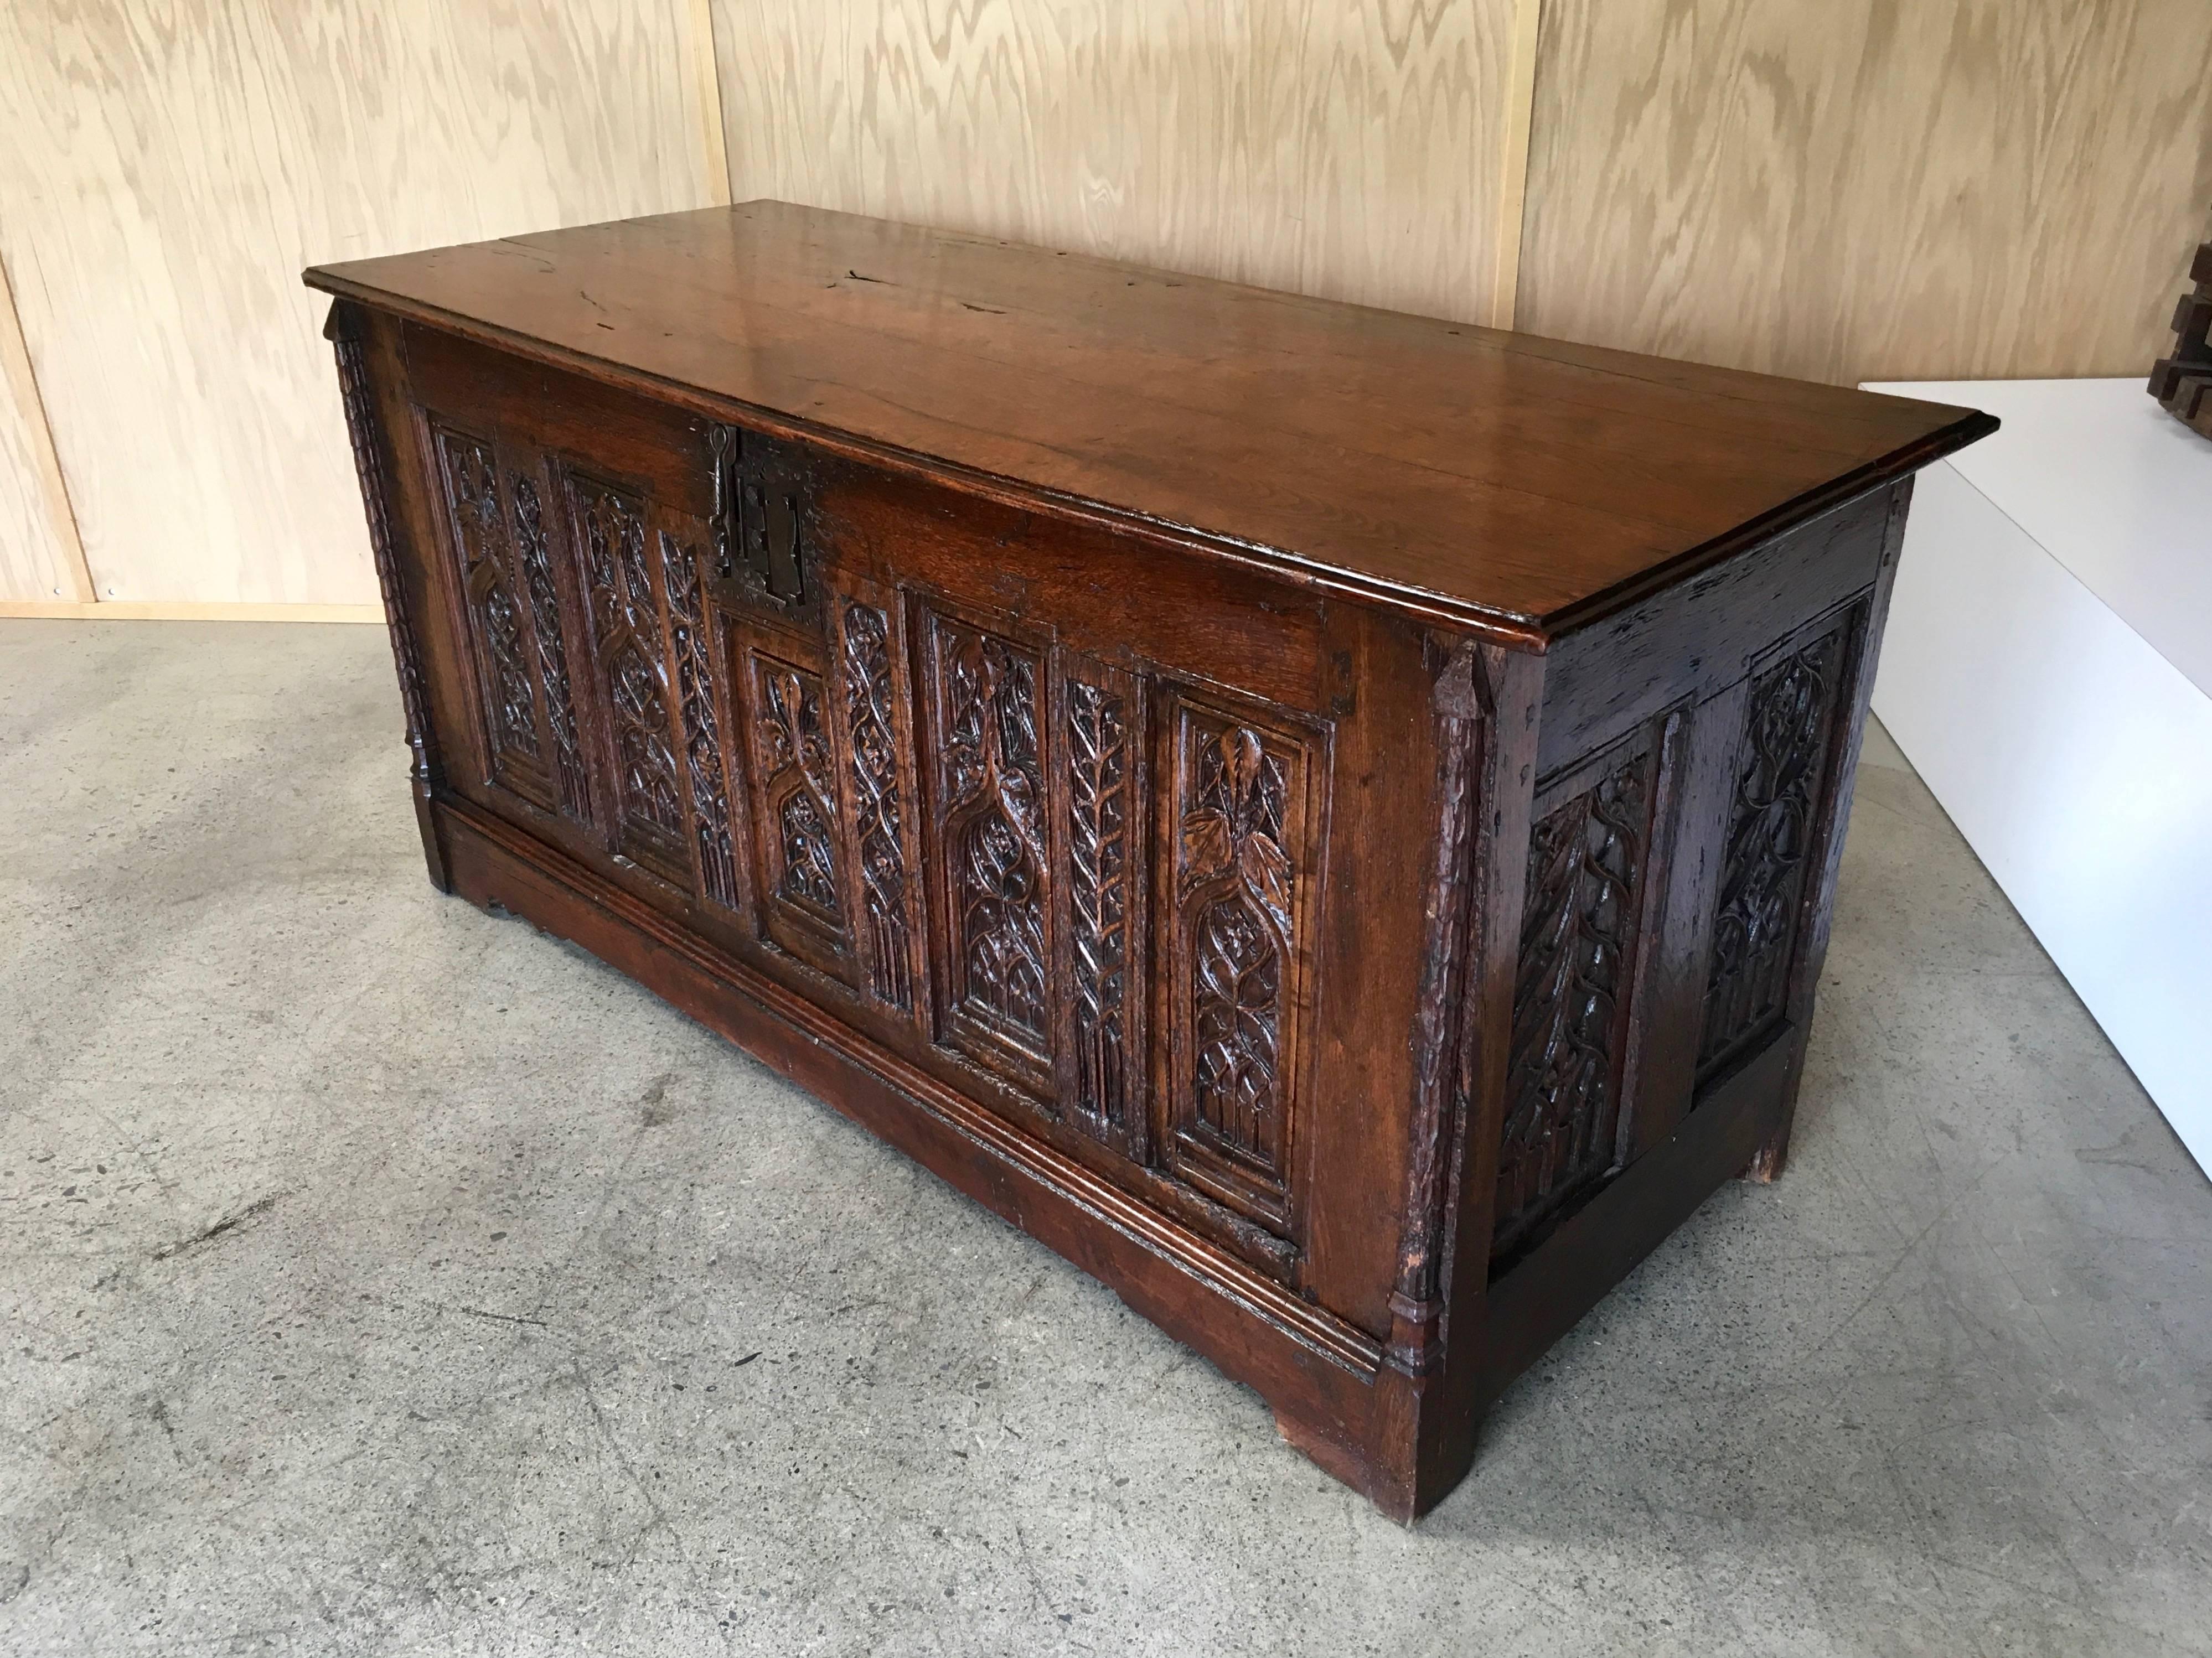 Hand-Carved Gothic Desk Converted from a Chest